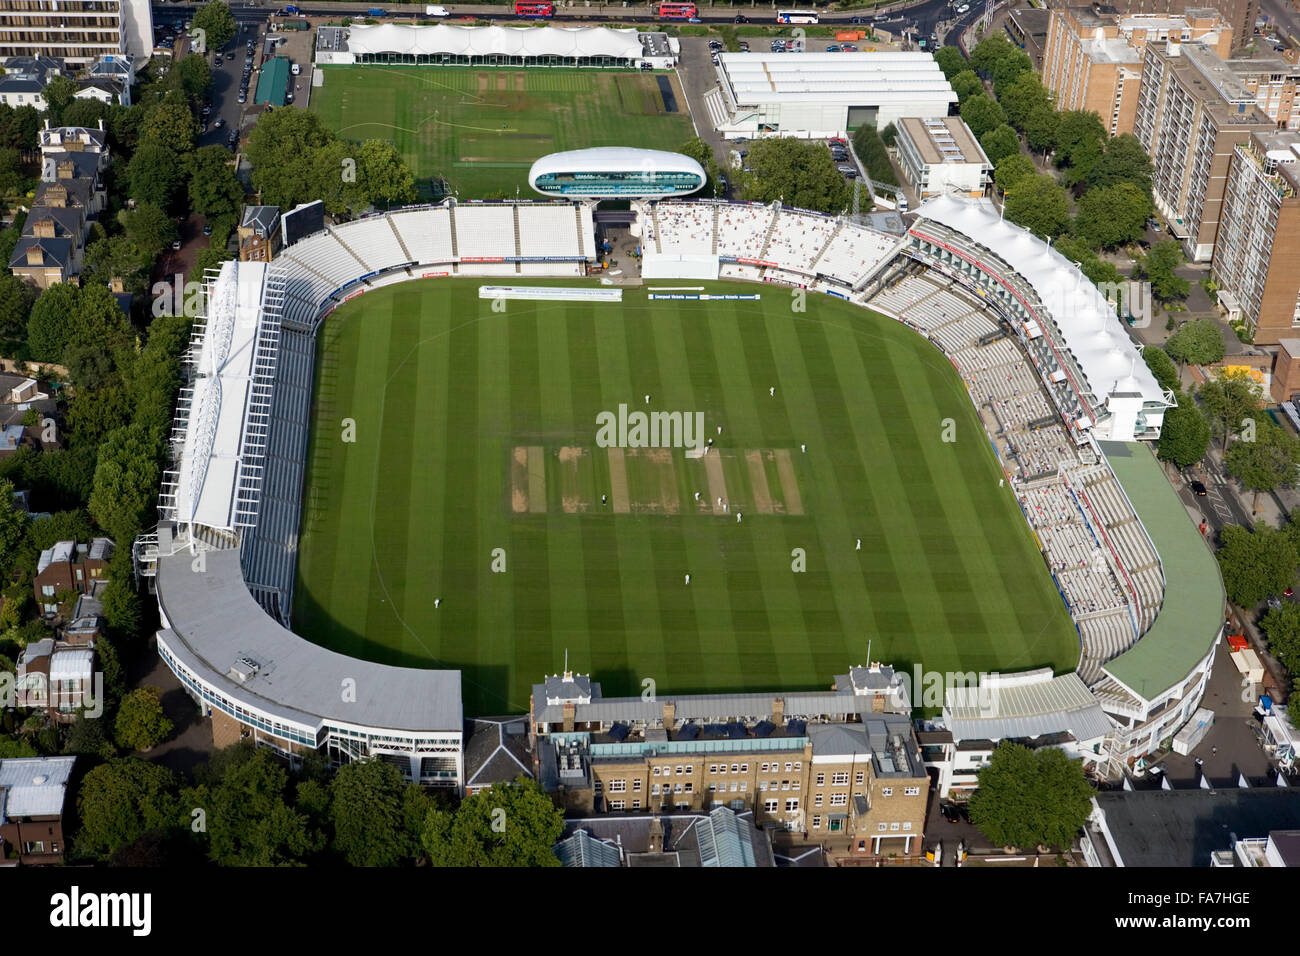 LORDS CRICKET GROUND, St Johns Wood, London. Founded on this site in 1814 the Home of Cricket is owned by the Marylebone Cricket Club (MCC), and is host to Middlesex County Cricket and the England and Wales Cricket Board. The match in progress is the firs Stock Photo